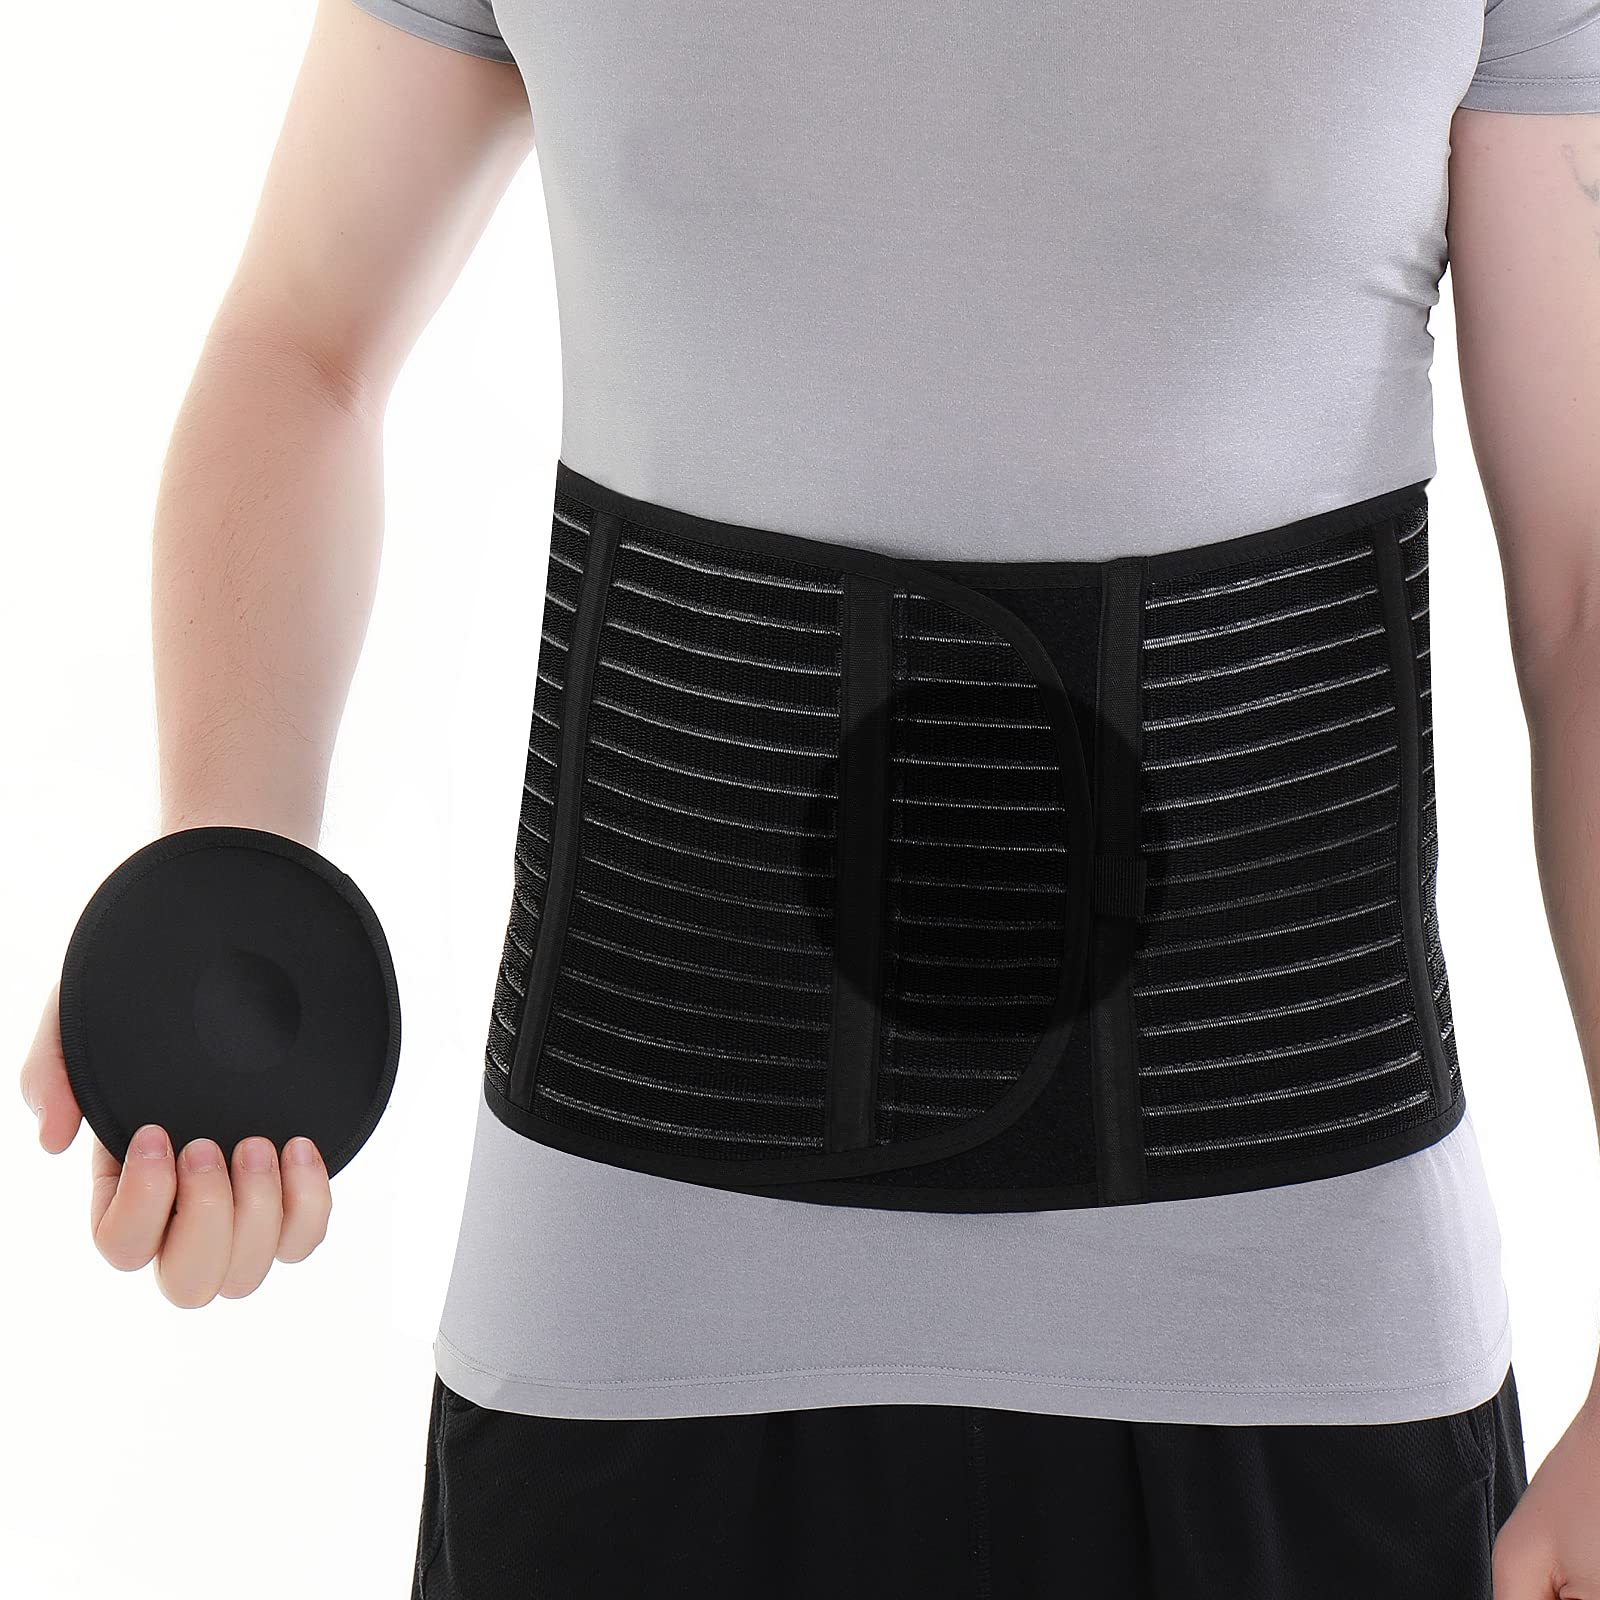 HKJD Umbilical Hernia Belt for Men & Women Abdominal Binder Support for Belly  Button Hernia Support Pain and Discomfort Relief from Umbilical Navel  Ventral and Incisional Hernias (37-47 L/XL) L-XL